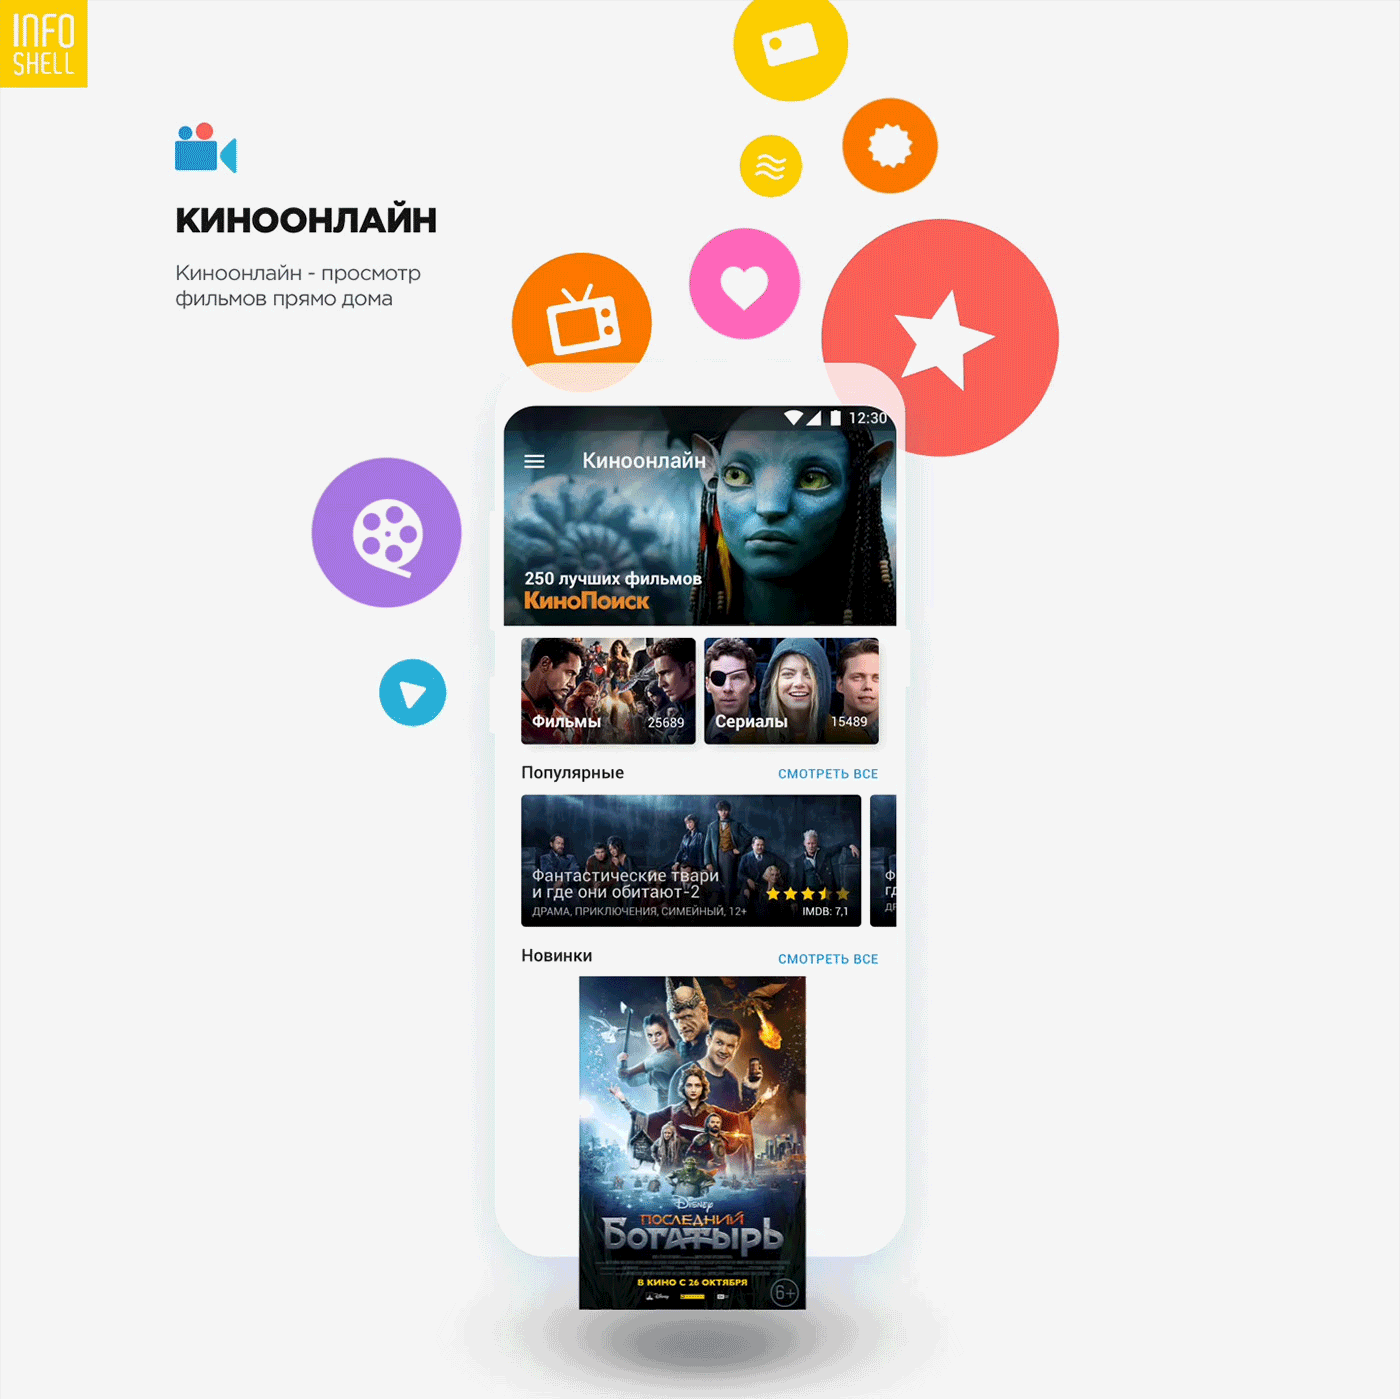 Kinohod is a service for buying cinema tickets online. 